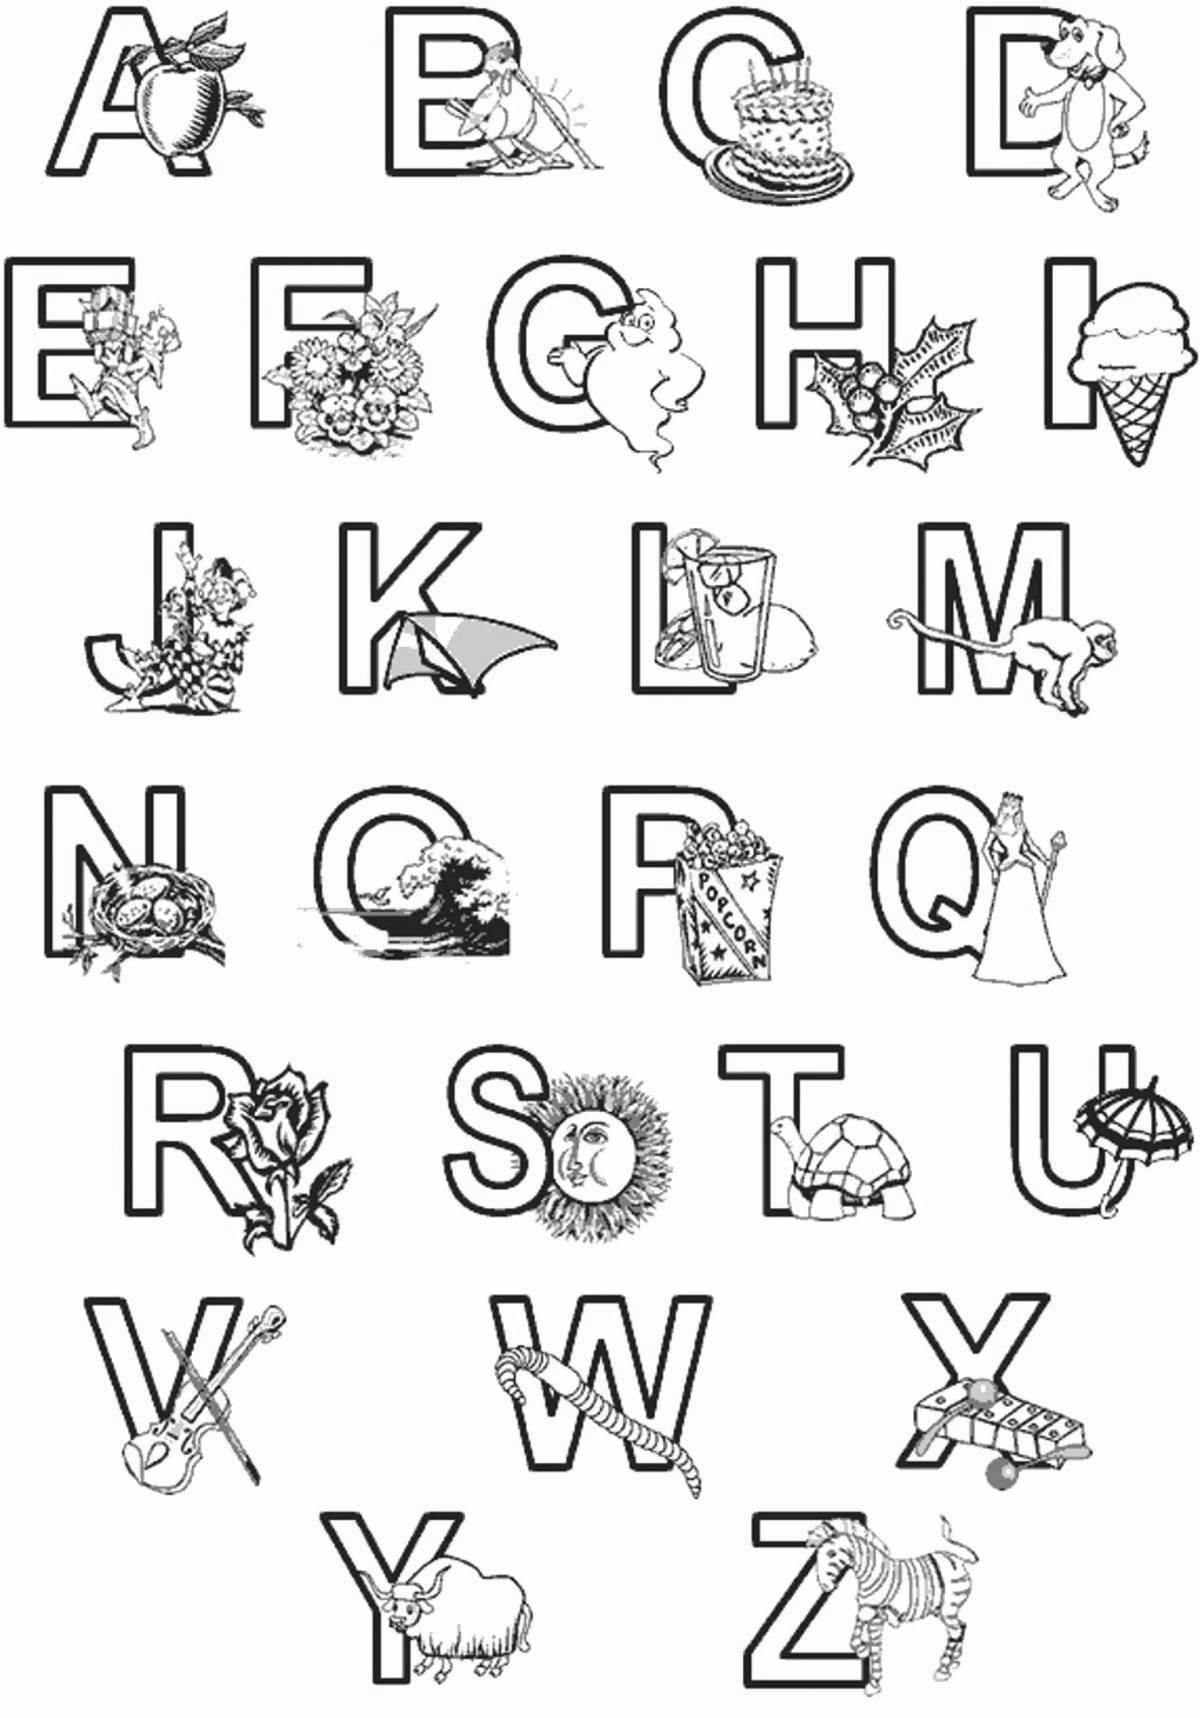 Amusing abc coloring book for kids